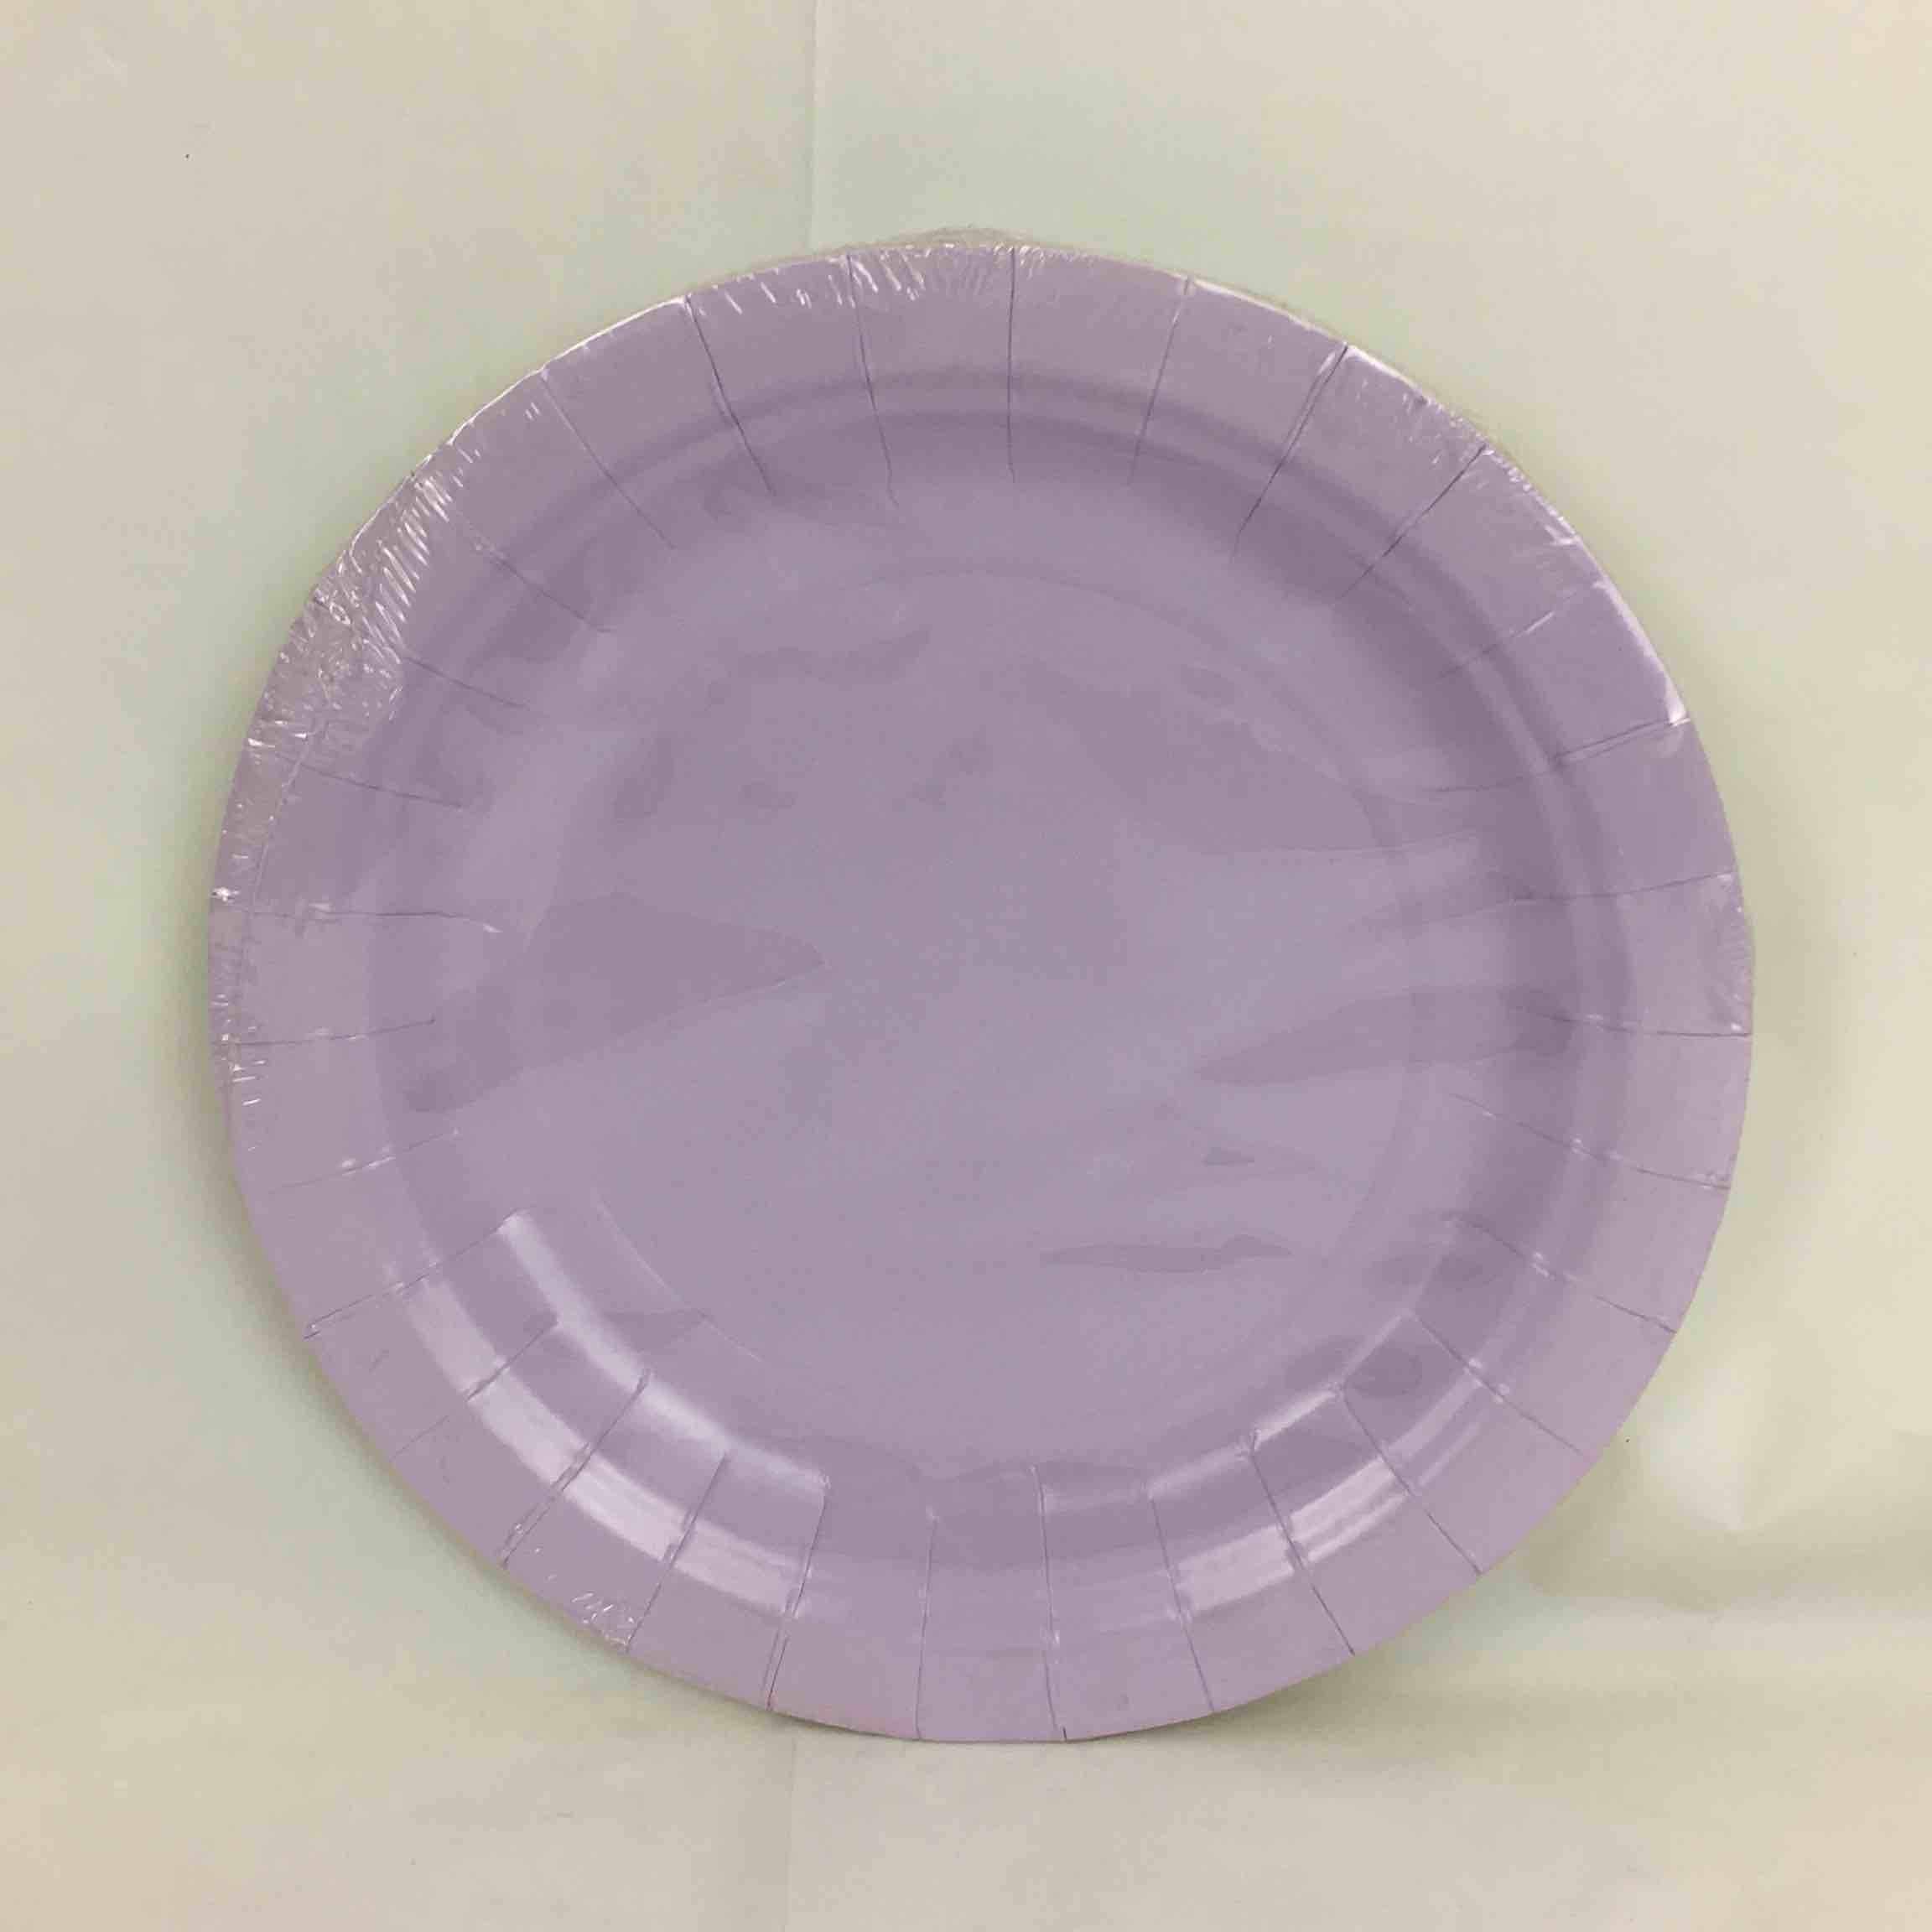 SOLID LAVENDER PLATES 7in  8pcs